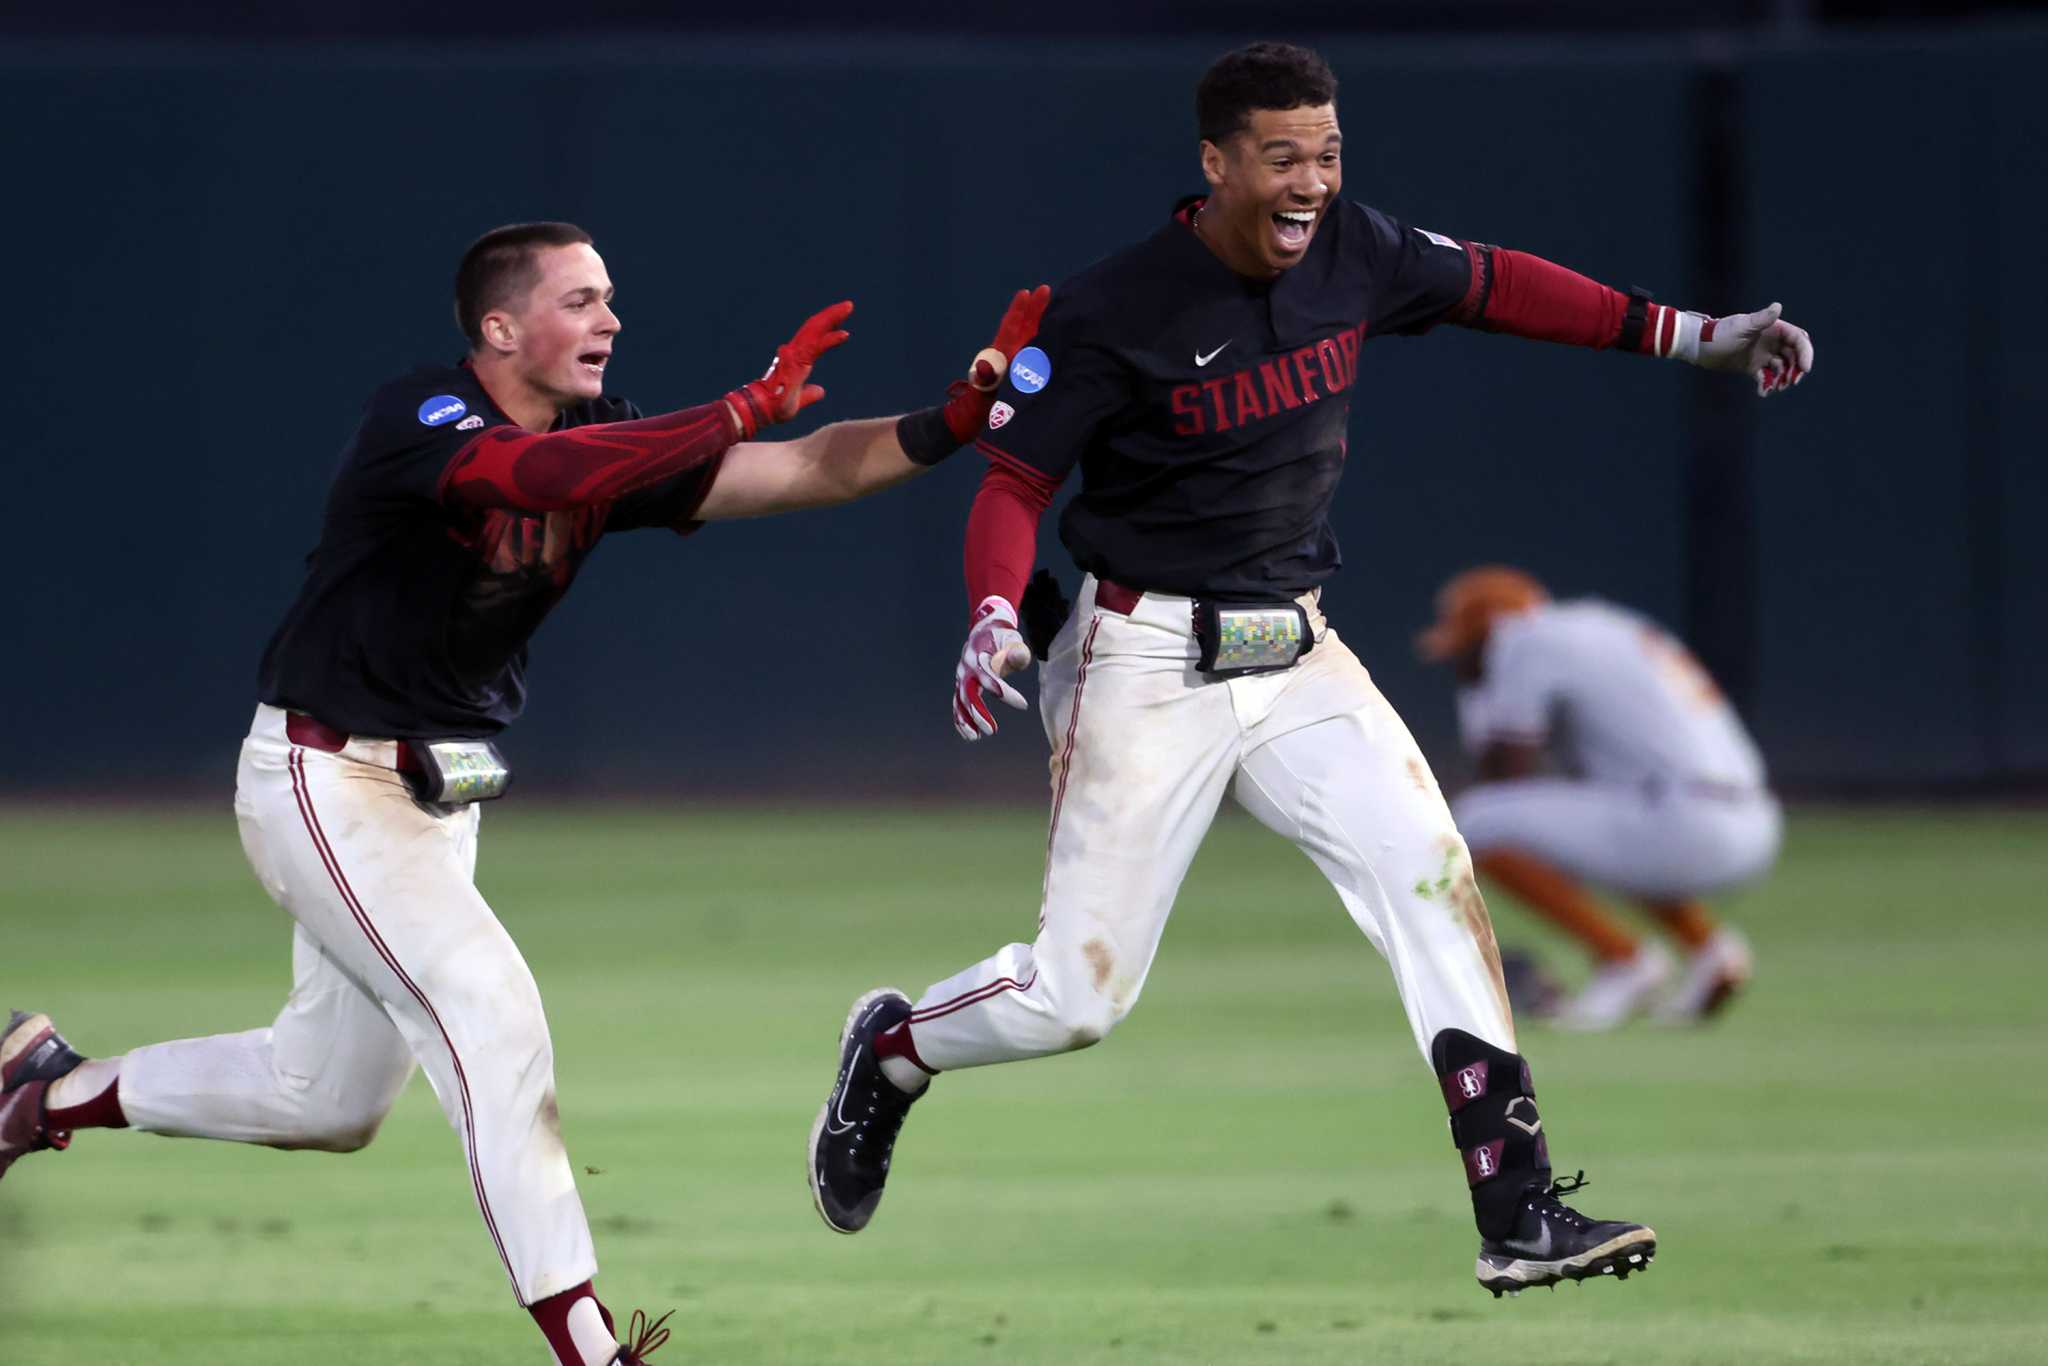 Have You Seen This? Stanford baseball turns walk-off homer into wild  walk-off double